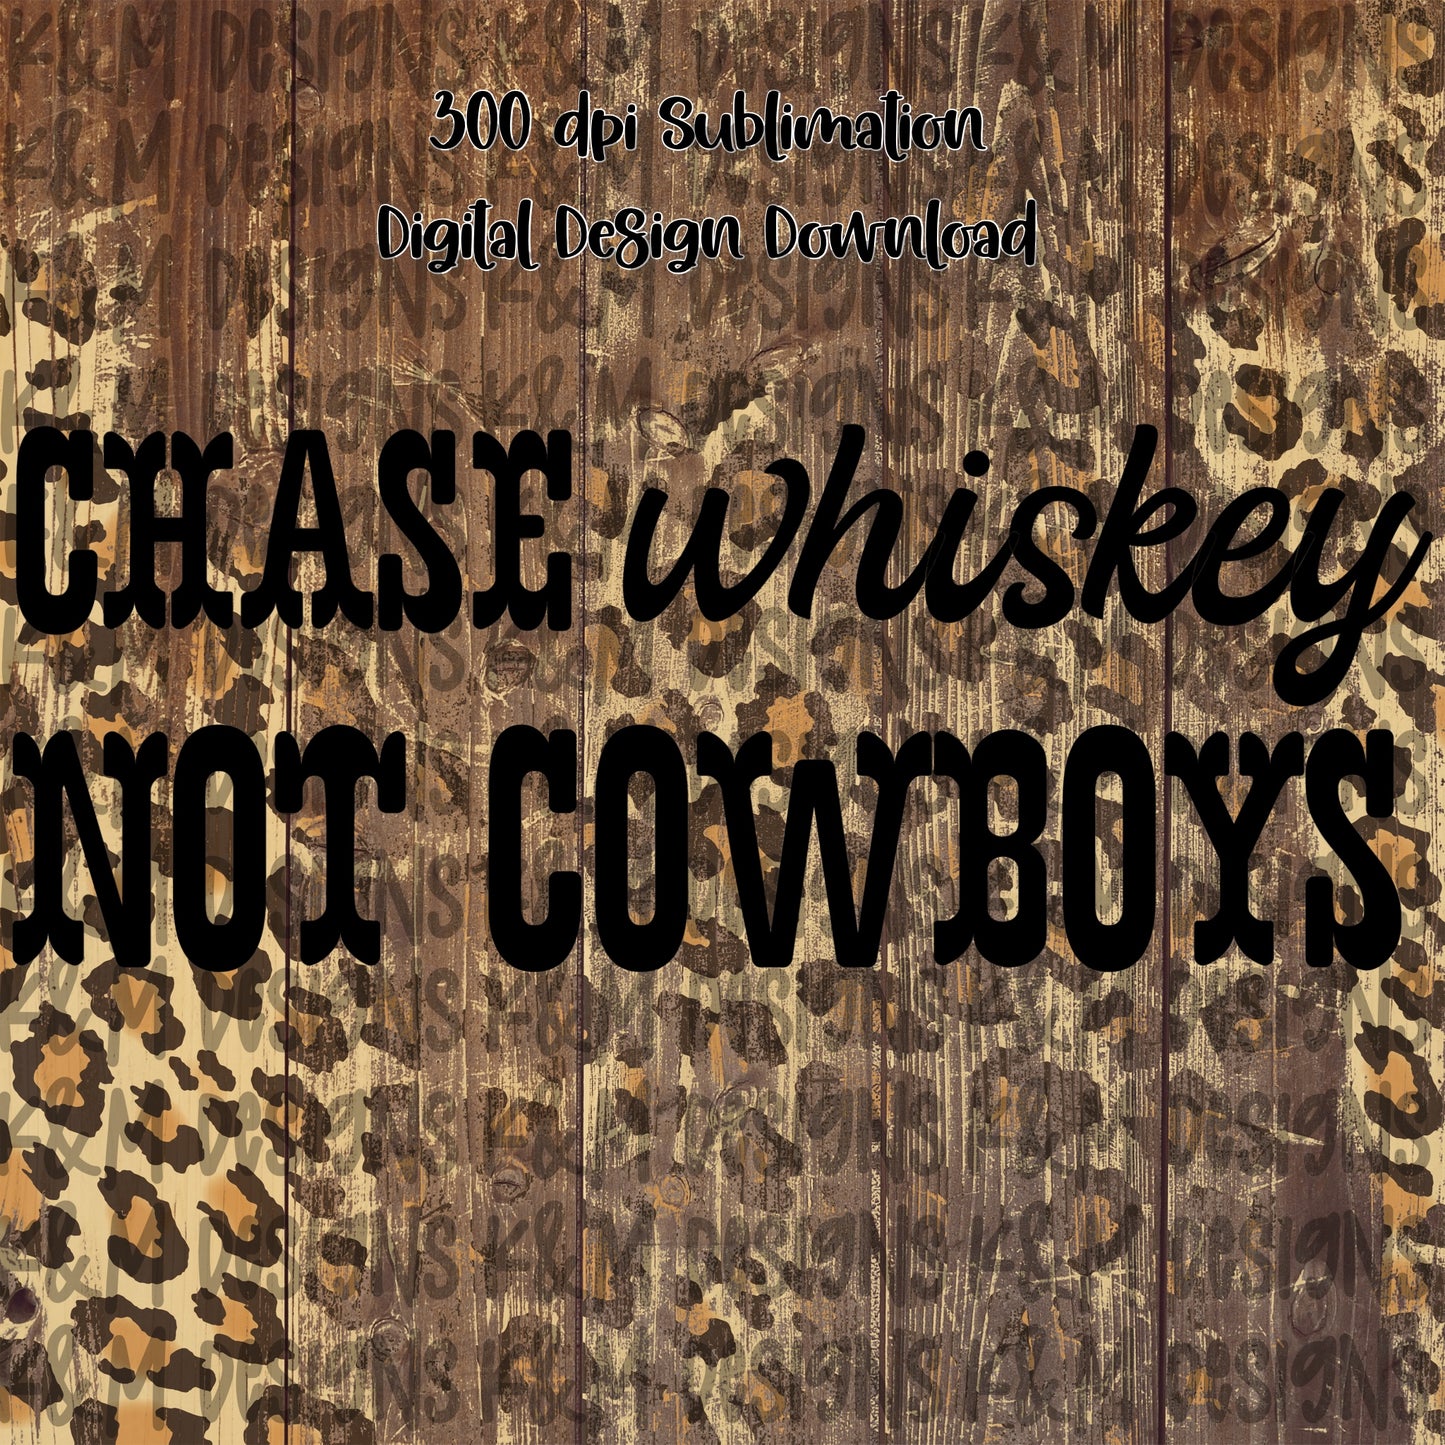 Chase Whiskey Not Cowboys Digital Download